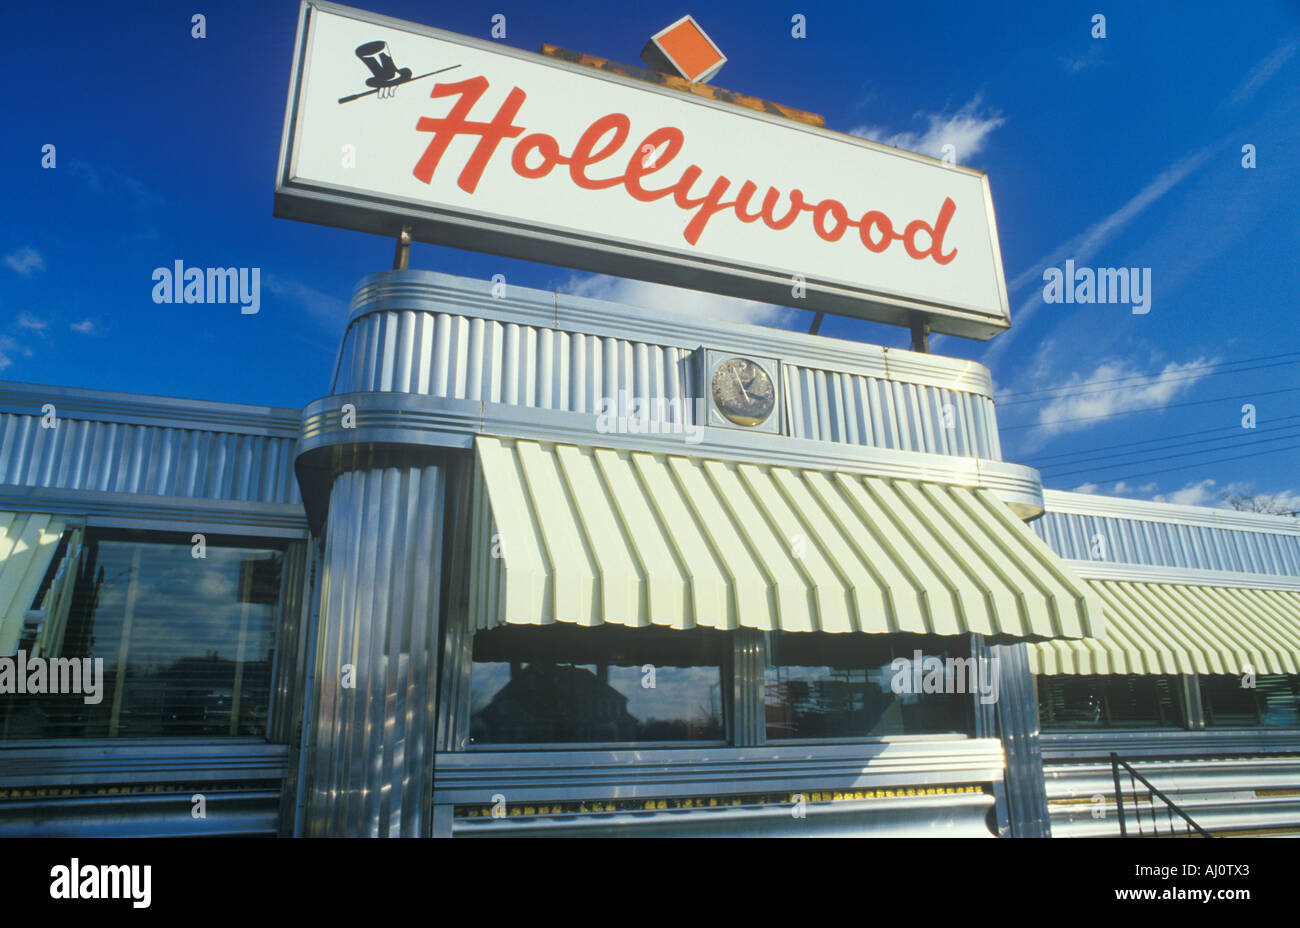 Retro style diner with awnings Dover DE Stock Photo